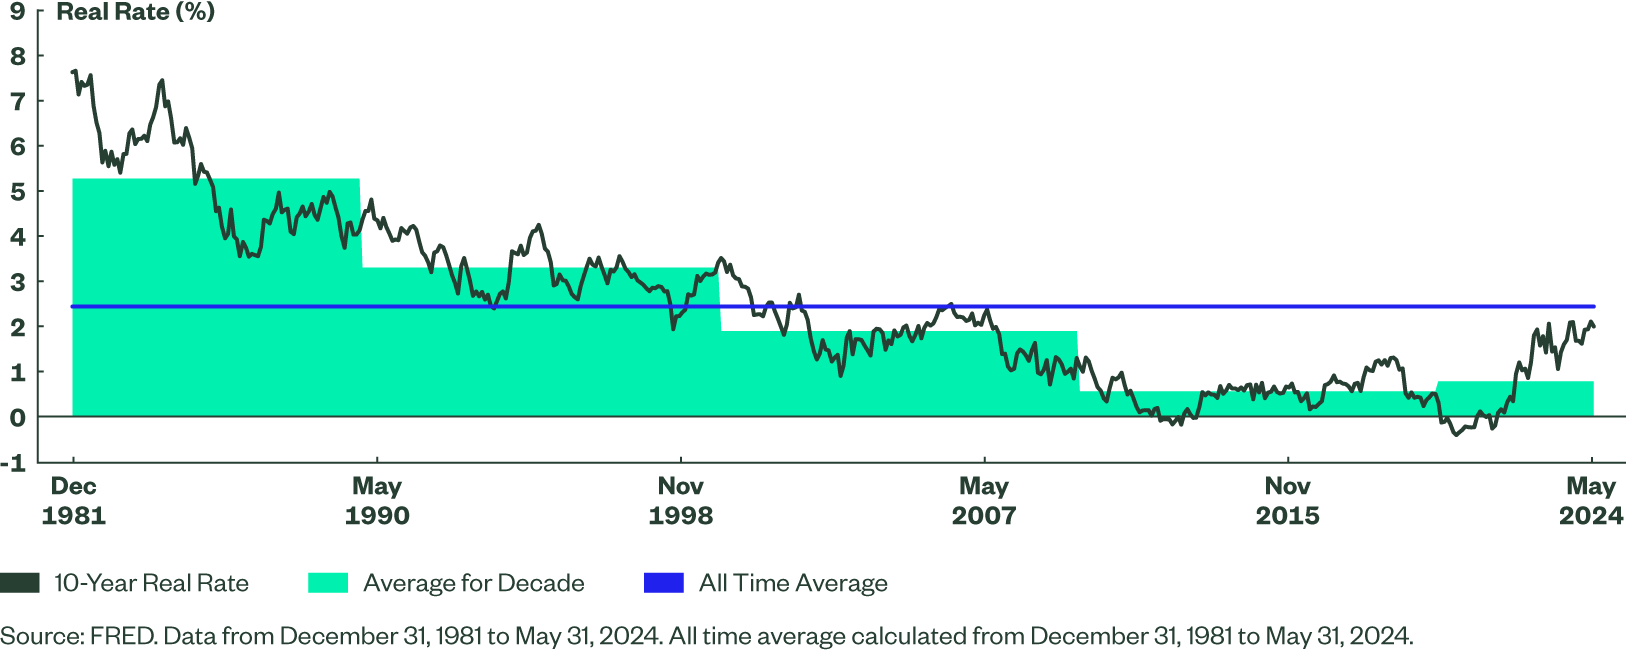 Figure 1: The 10-Year Real Rate of Interest Has Been on a Downward Trajectory